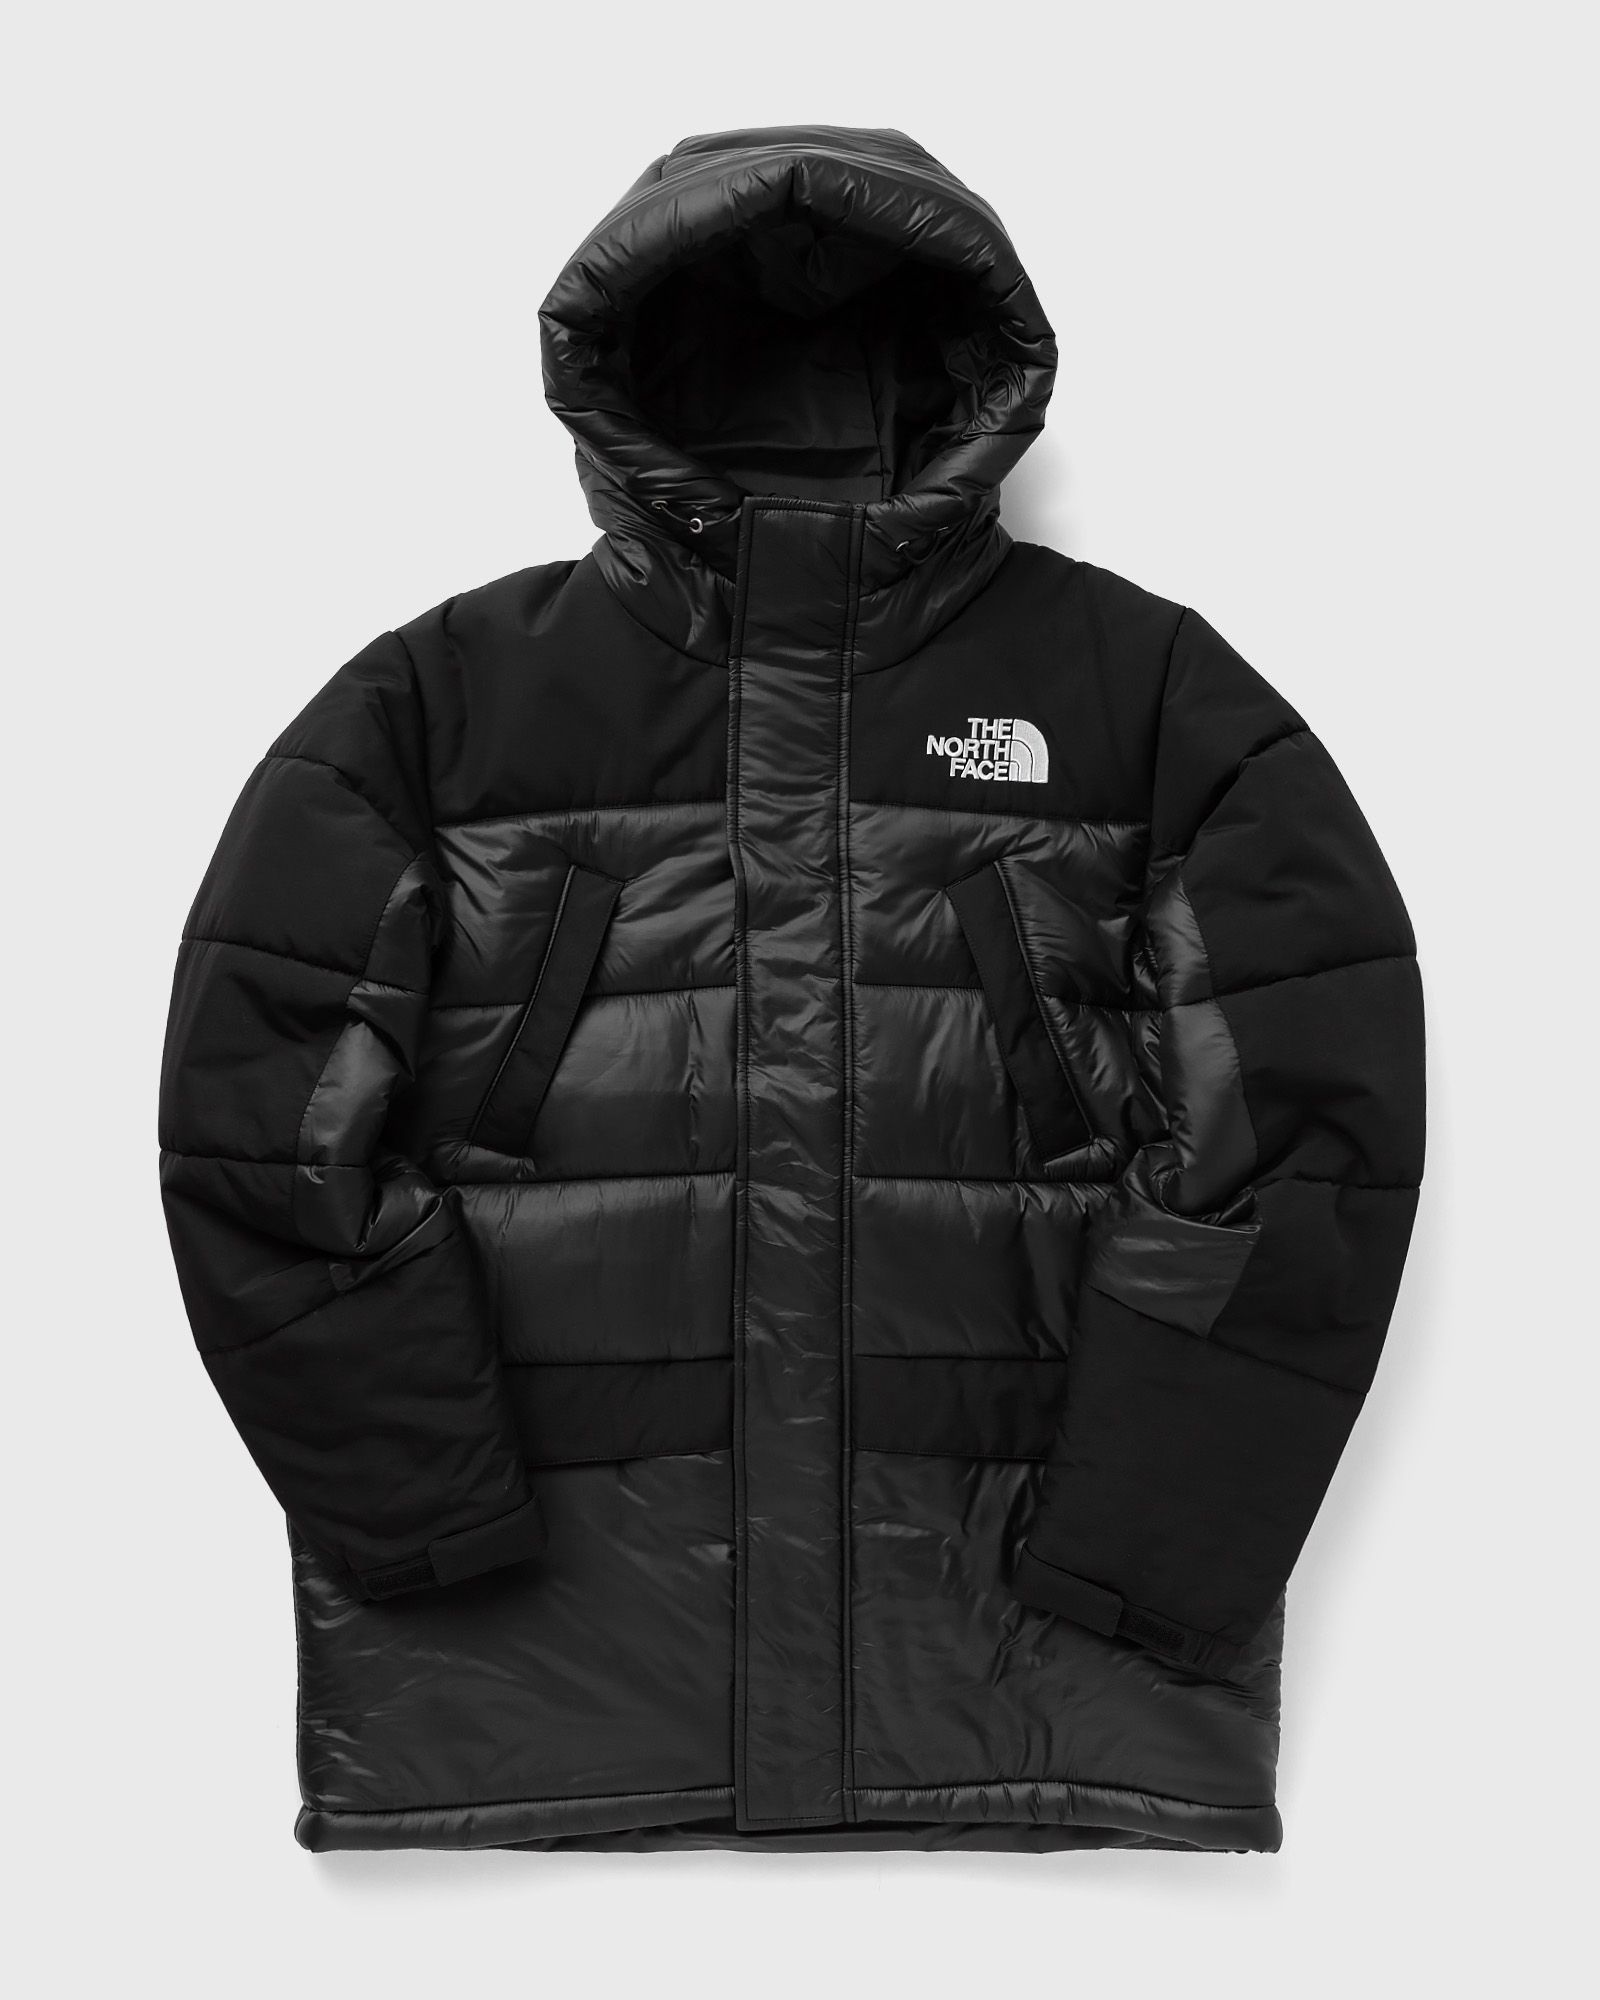 The North Face - himalayan insulated parka men down & puffer jackets|parkas black in größe:xxl